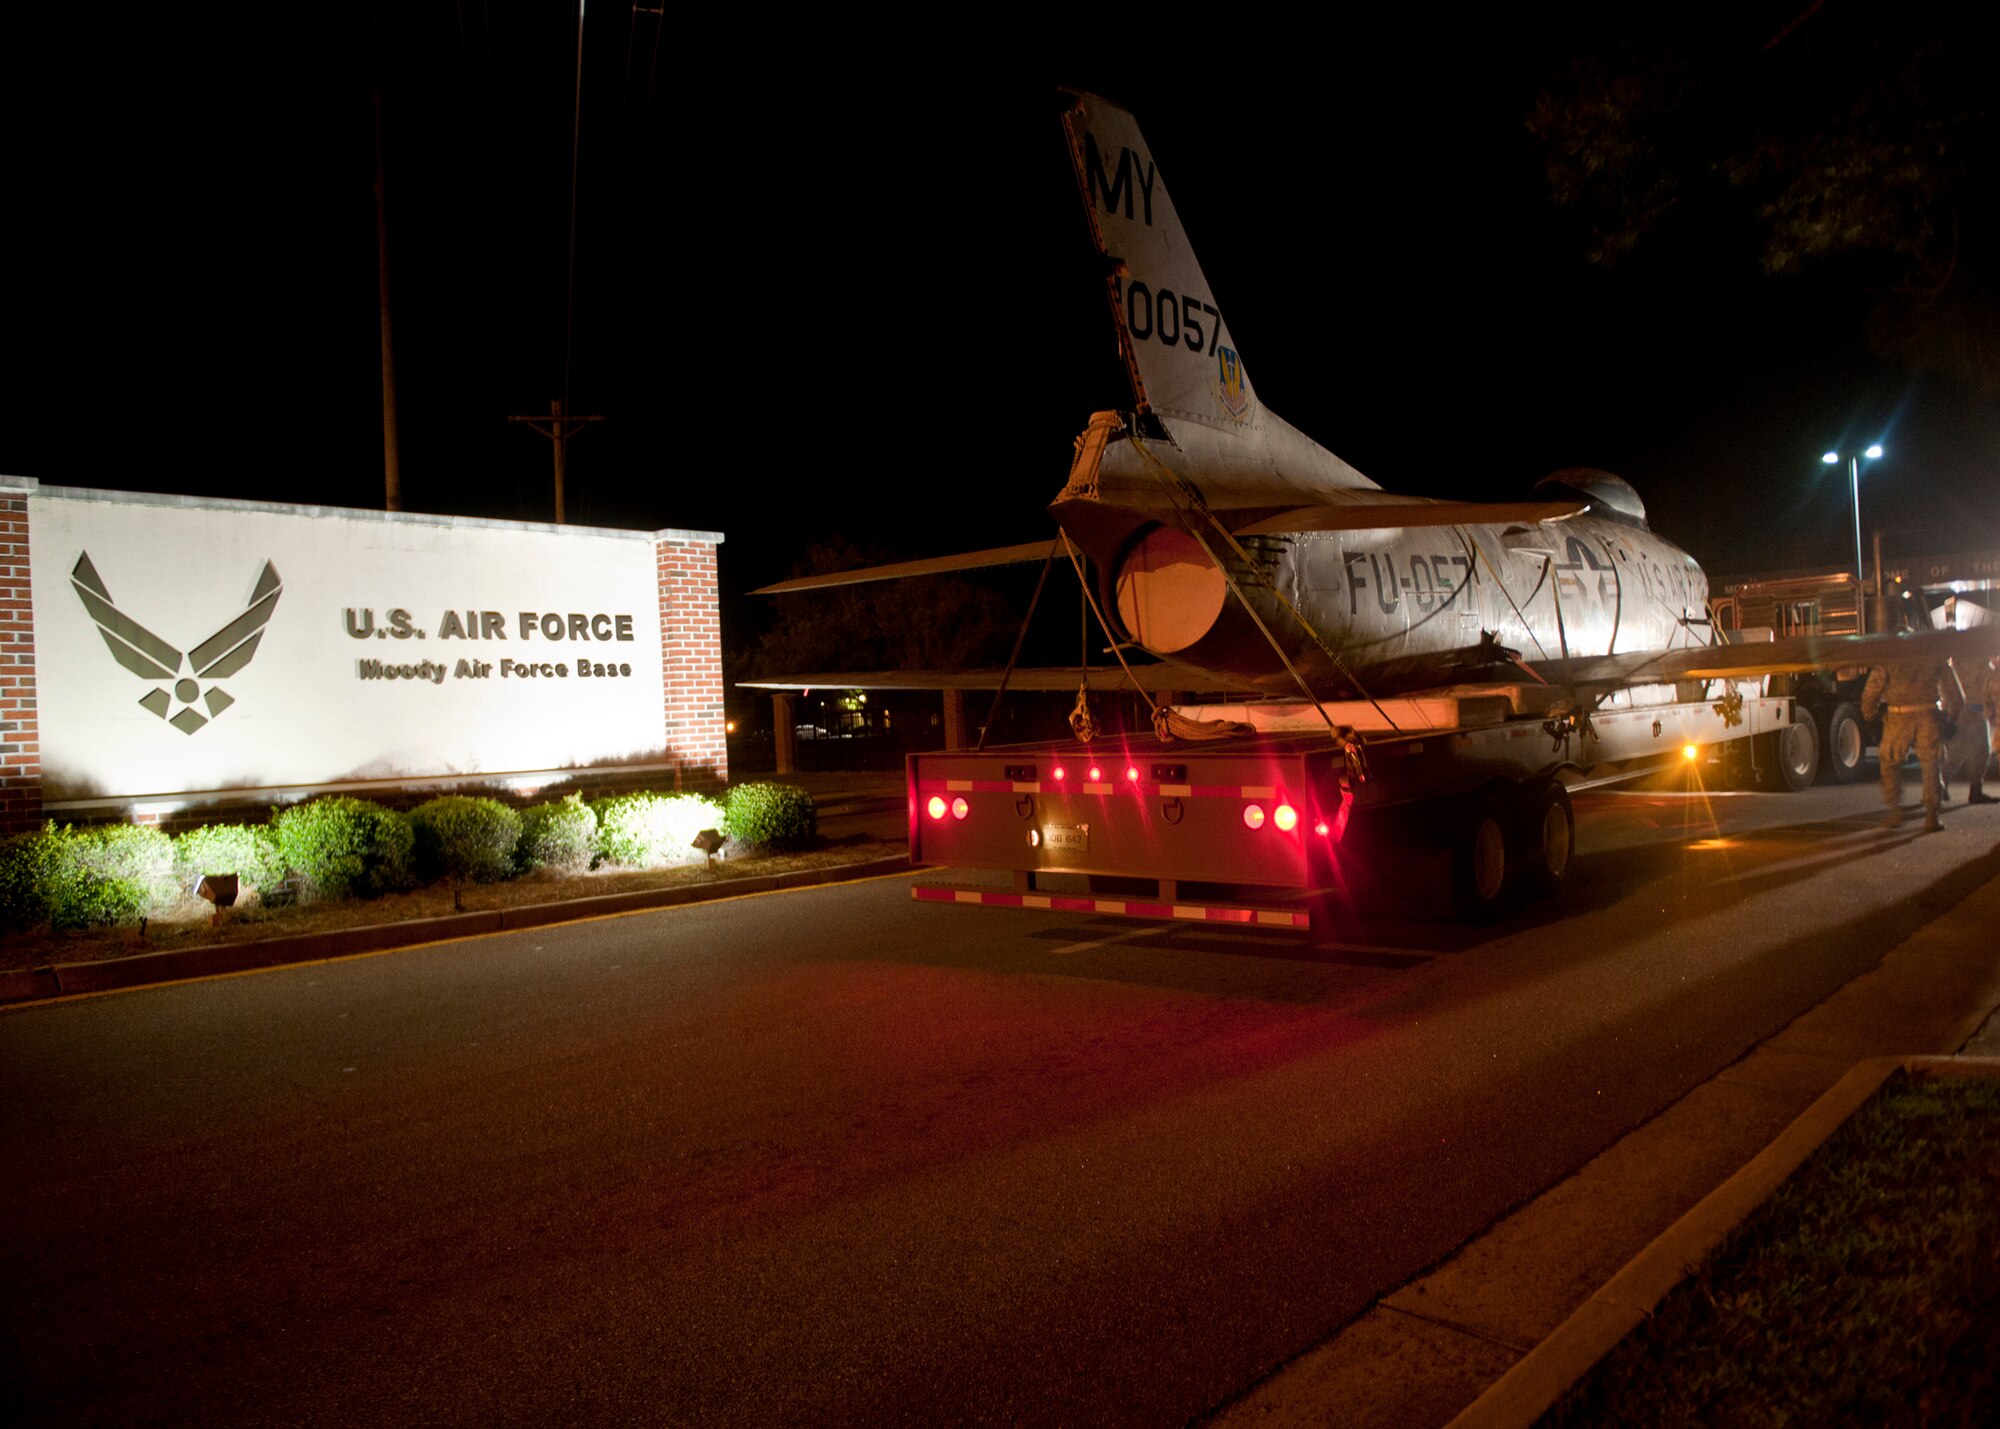 An F-86L Sabre arrives at Moody Air Force Base, Ga., after being transported from downtown Valdosta, Ga., April 25, 2012. Several city and base agencies assisted in the relocation, to include: Moody civil engineer squadron, security forces squadron, crash recovery, Lowndes County and Valdosta Sheriff’s Department, and Valdosta utility departments. Varying equipment was used to safely and securely transport the aircraft. (U.S. Air Force photo by Senior Airman Eileen Meier/Released)